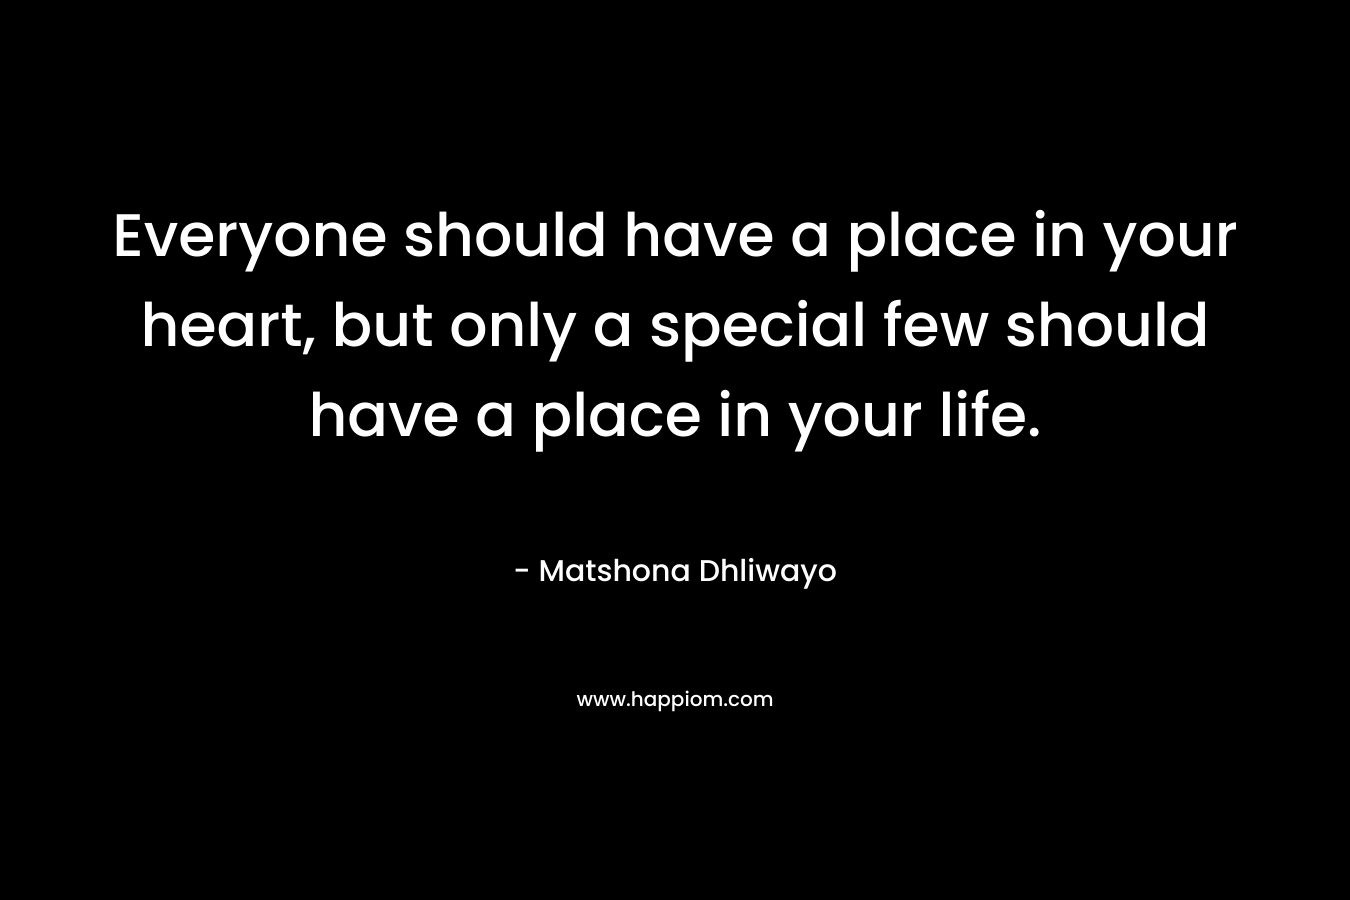 Everyone should have a place in your heart, but only a special few should have a place in your life.